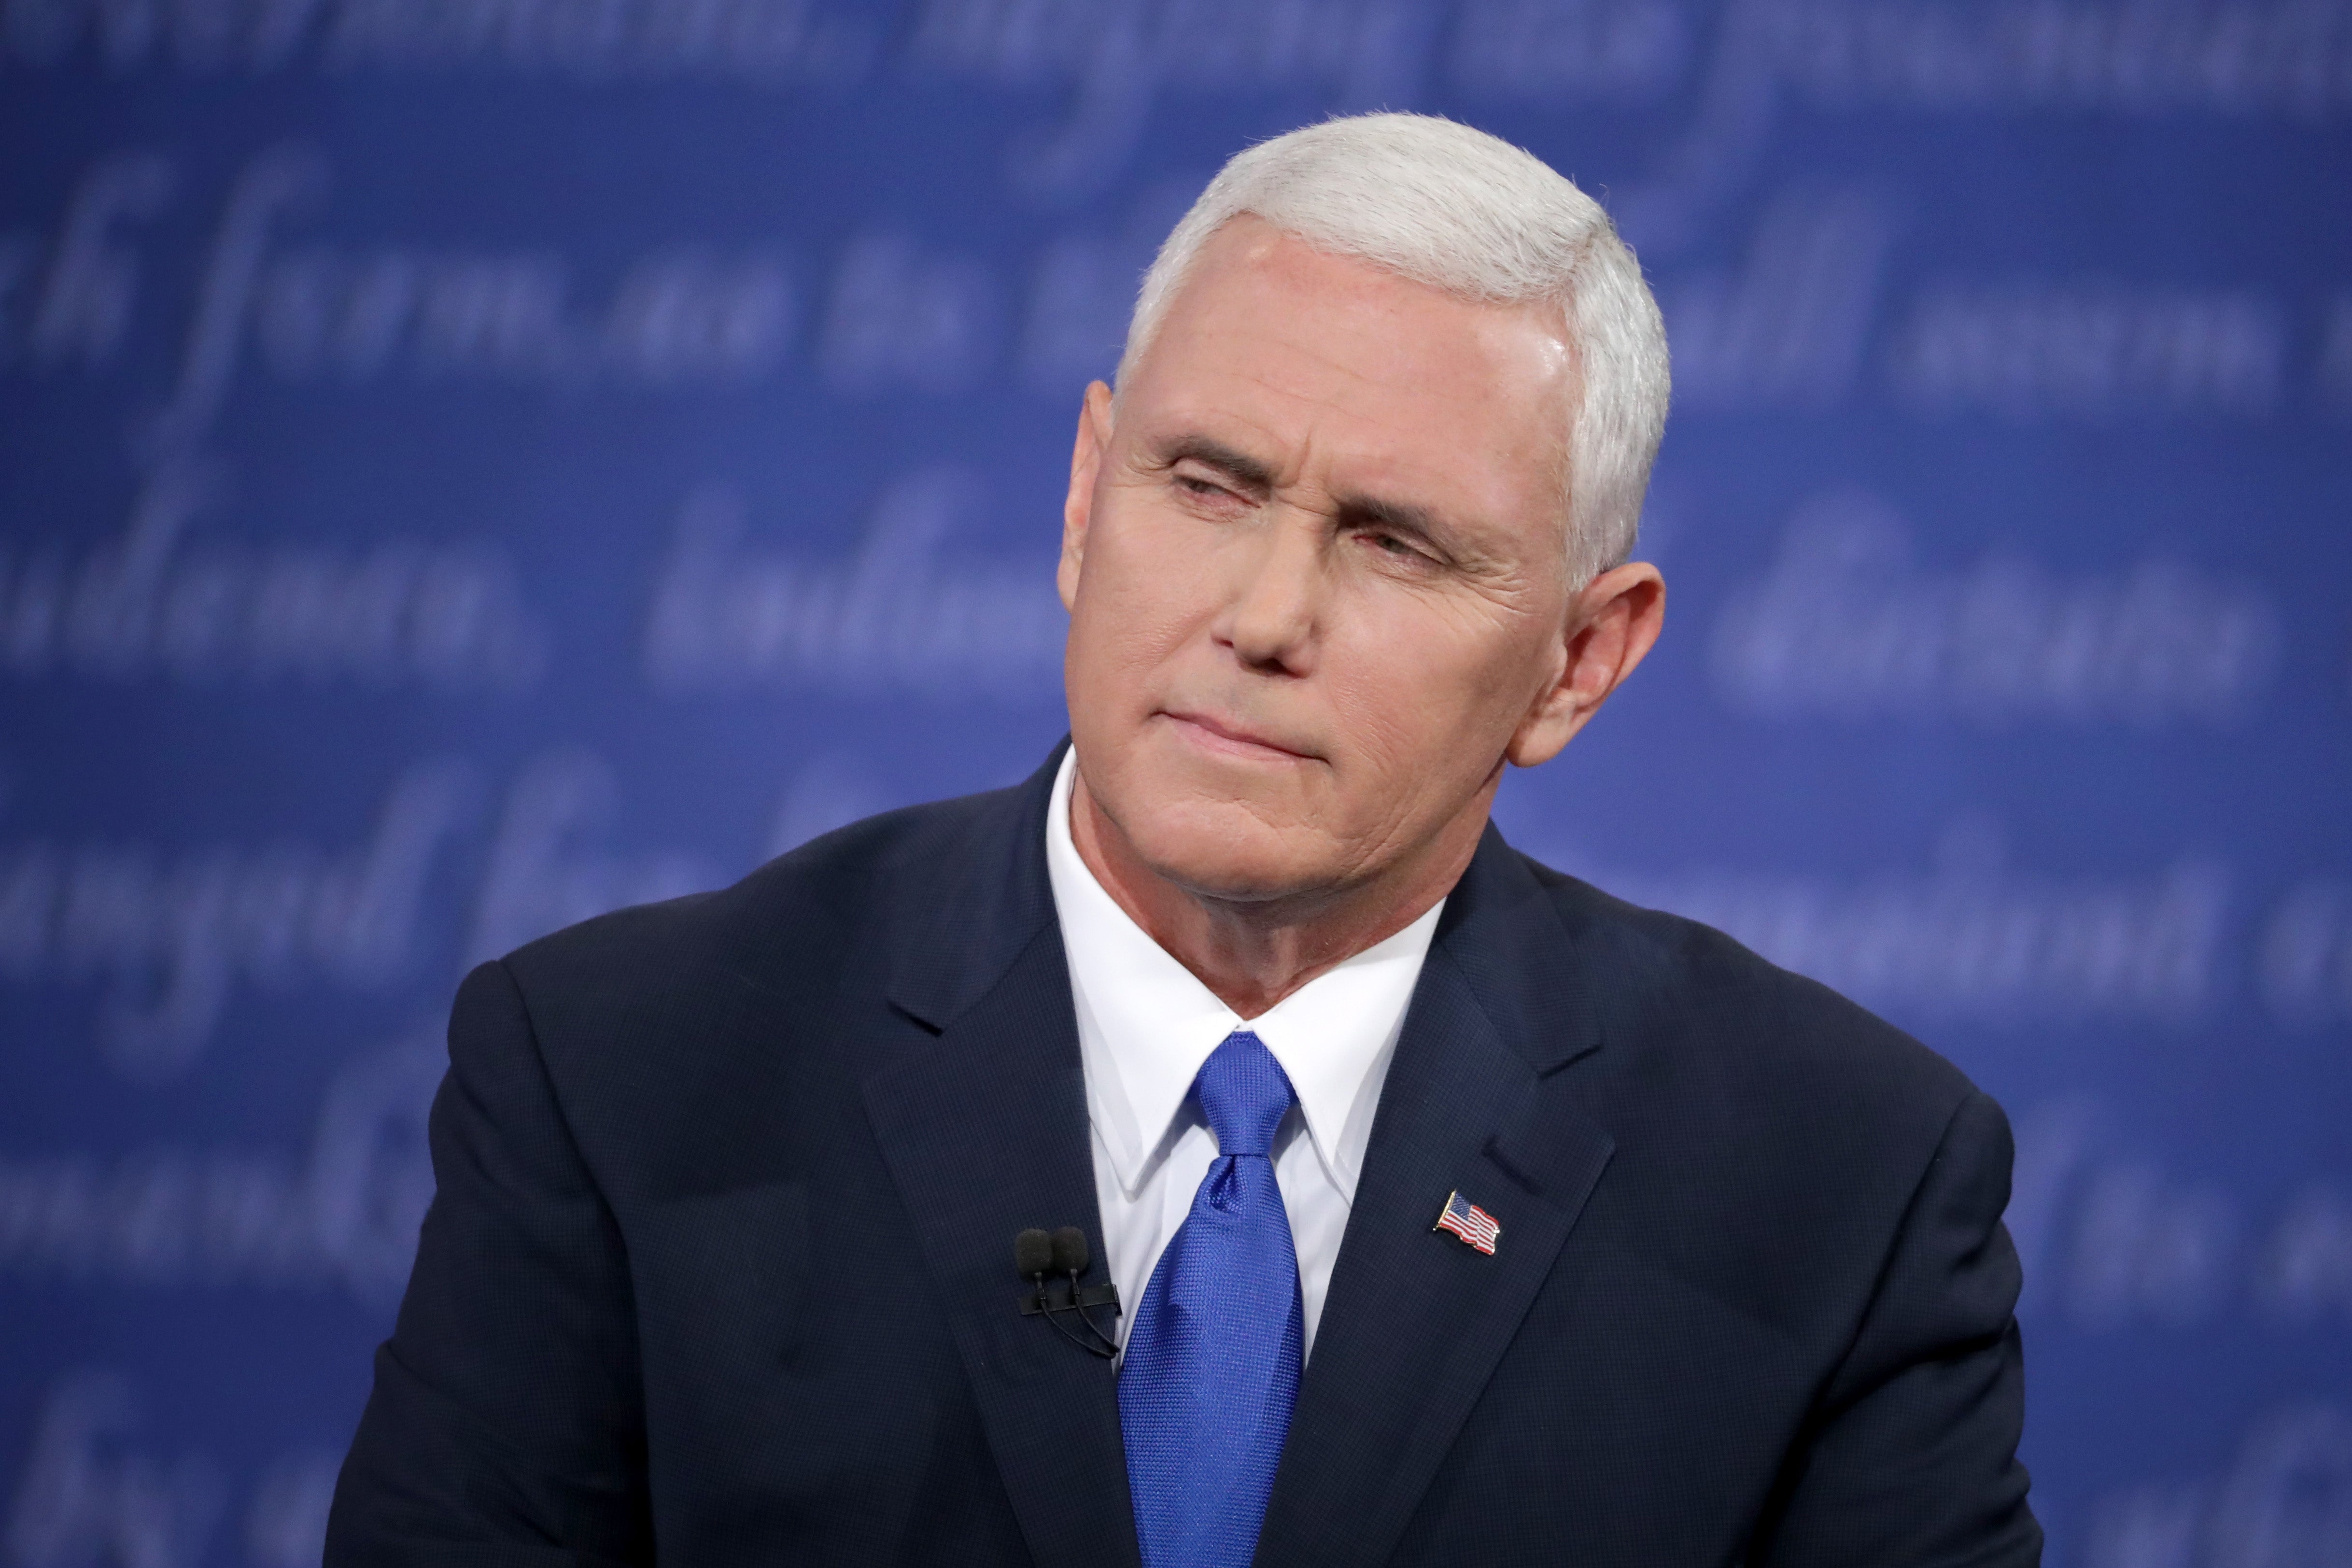 Mike Pence: ‘I Don’t Understand’ Michelle Obama’s Criticism of Donald Trump
